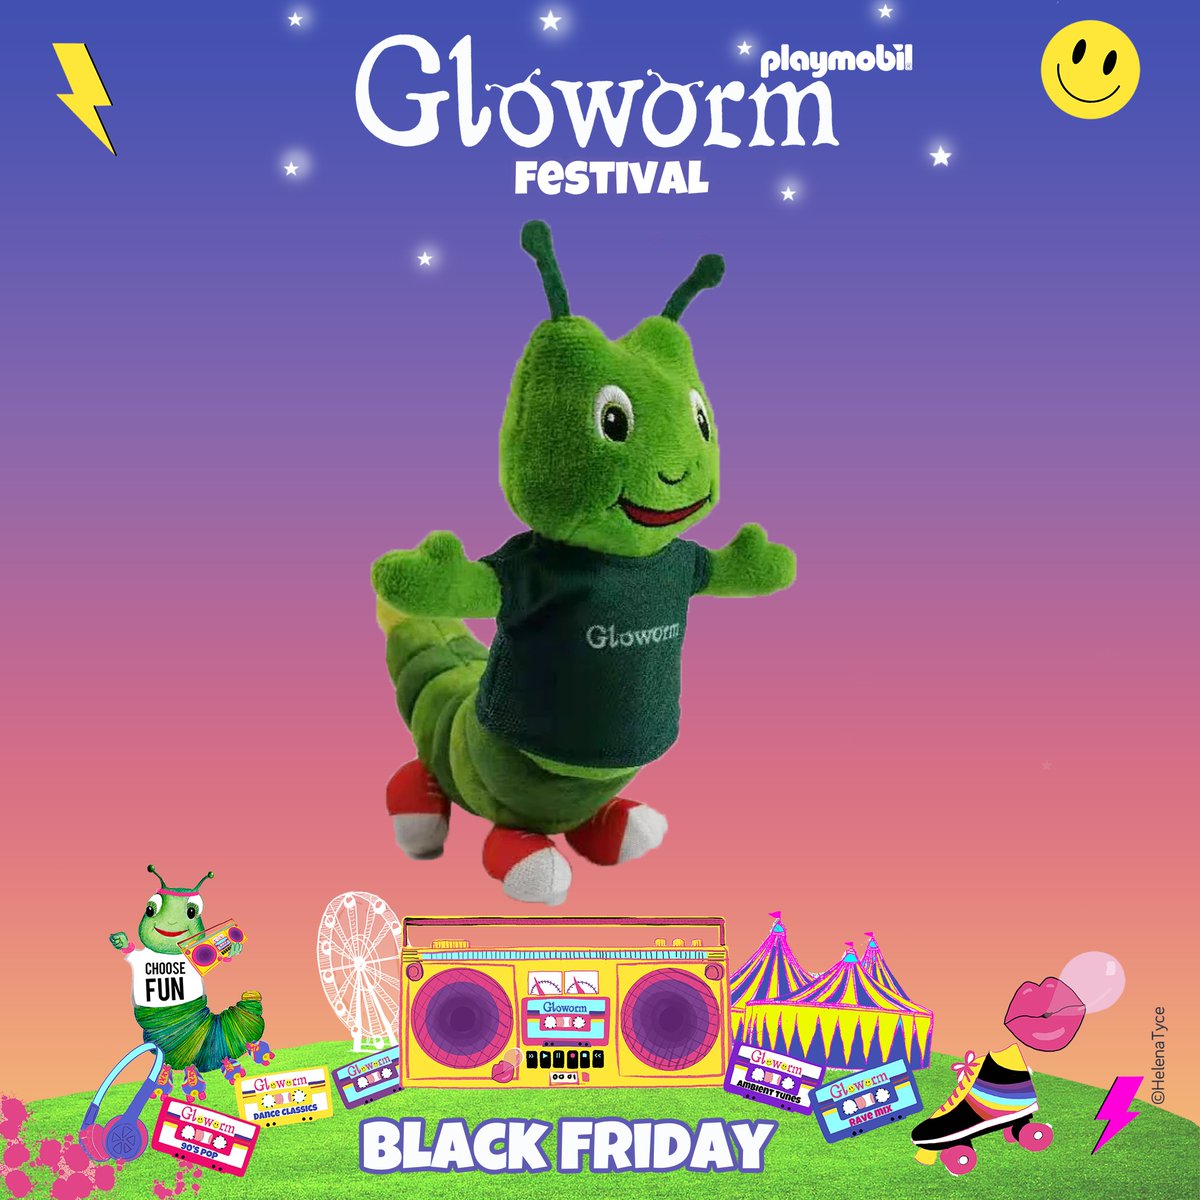 Until Midnight on 24/11/23, you will receive a FREE Gilbert toy with every ticket sale order (one toy per order).🤩 Email info@glowormfestival.co.uk with your order confirmation and postal address and your toy will be sent to you.🎉 glowormfestival.co.uk 🎟️ #BlackFriday